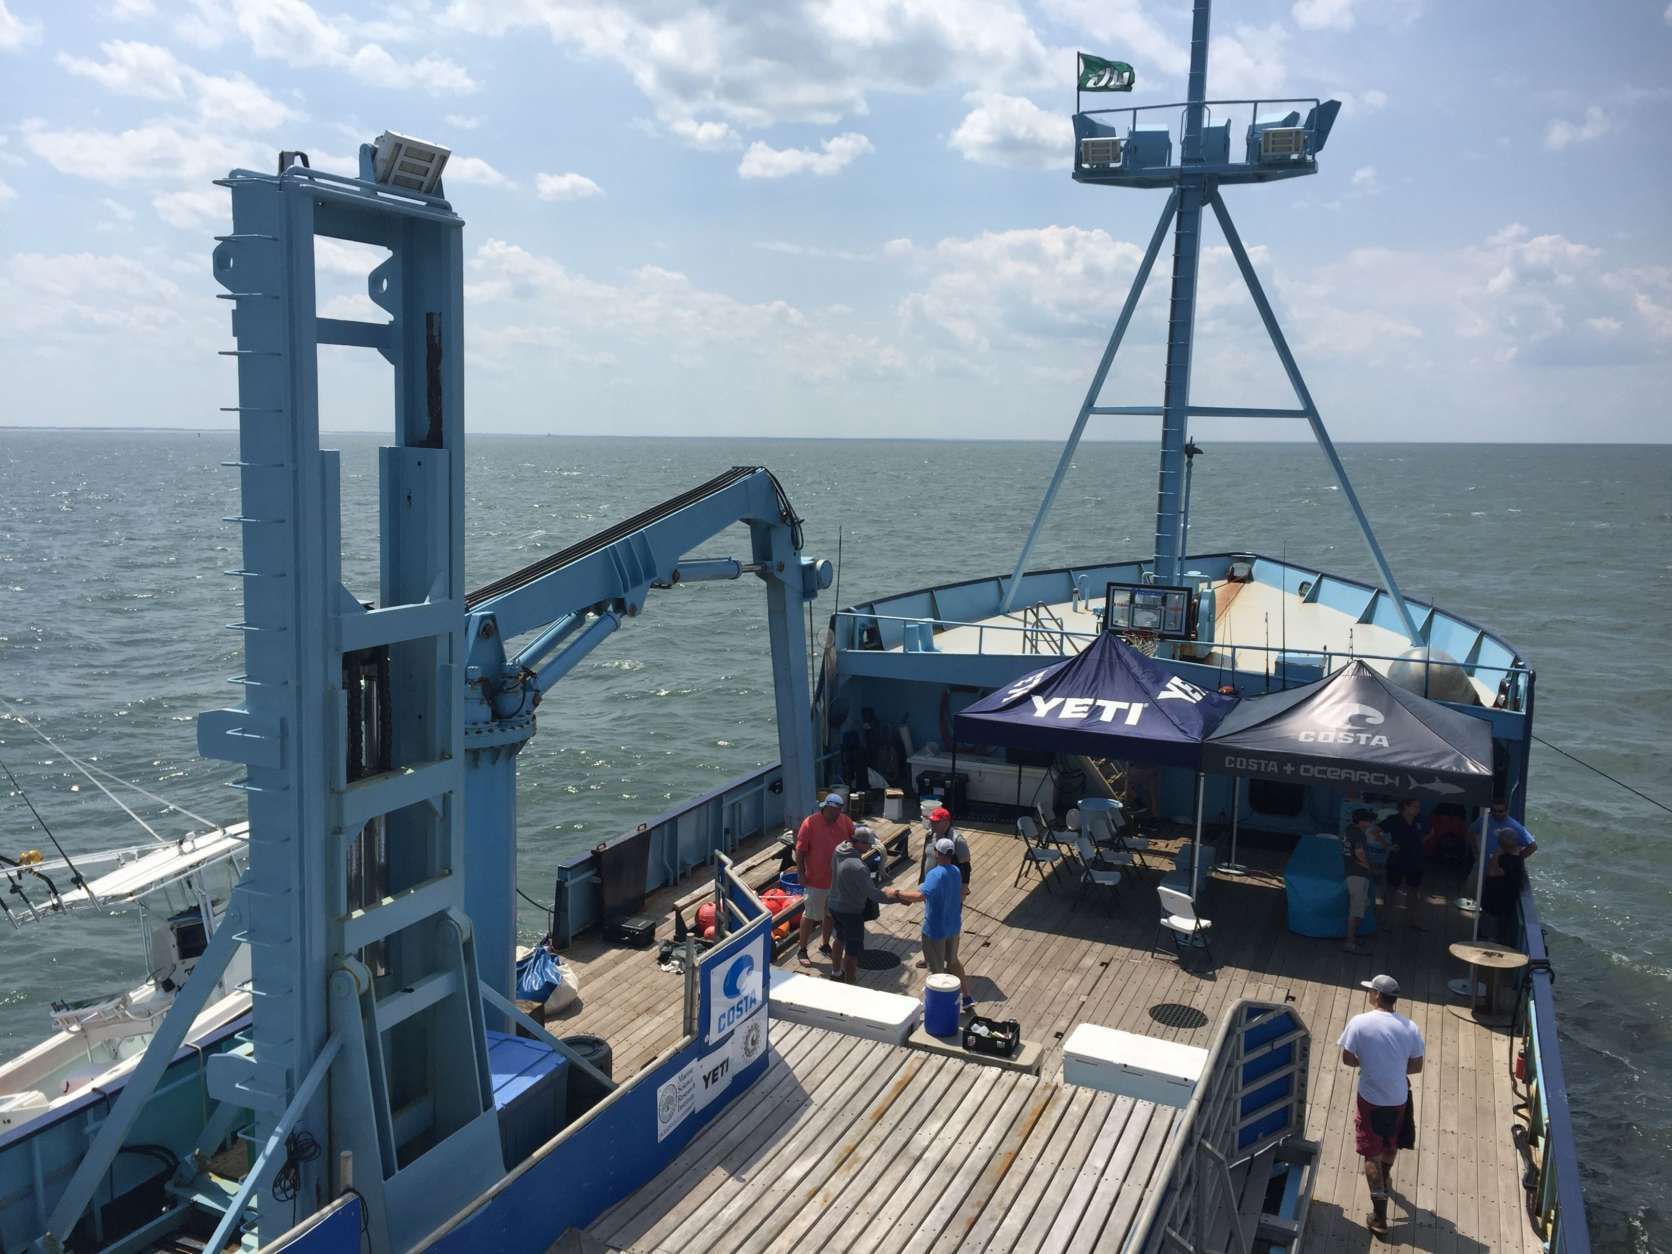 Some OCEARCH scientists aren't pleased with the sensationalism surrounding sharks, which they say is continued by movies like "Jaws" and programs like "Shark Week." (WTOP/Michelle Basch)